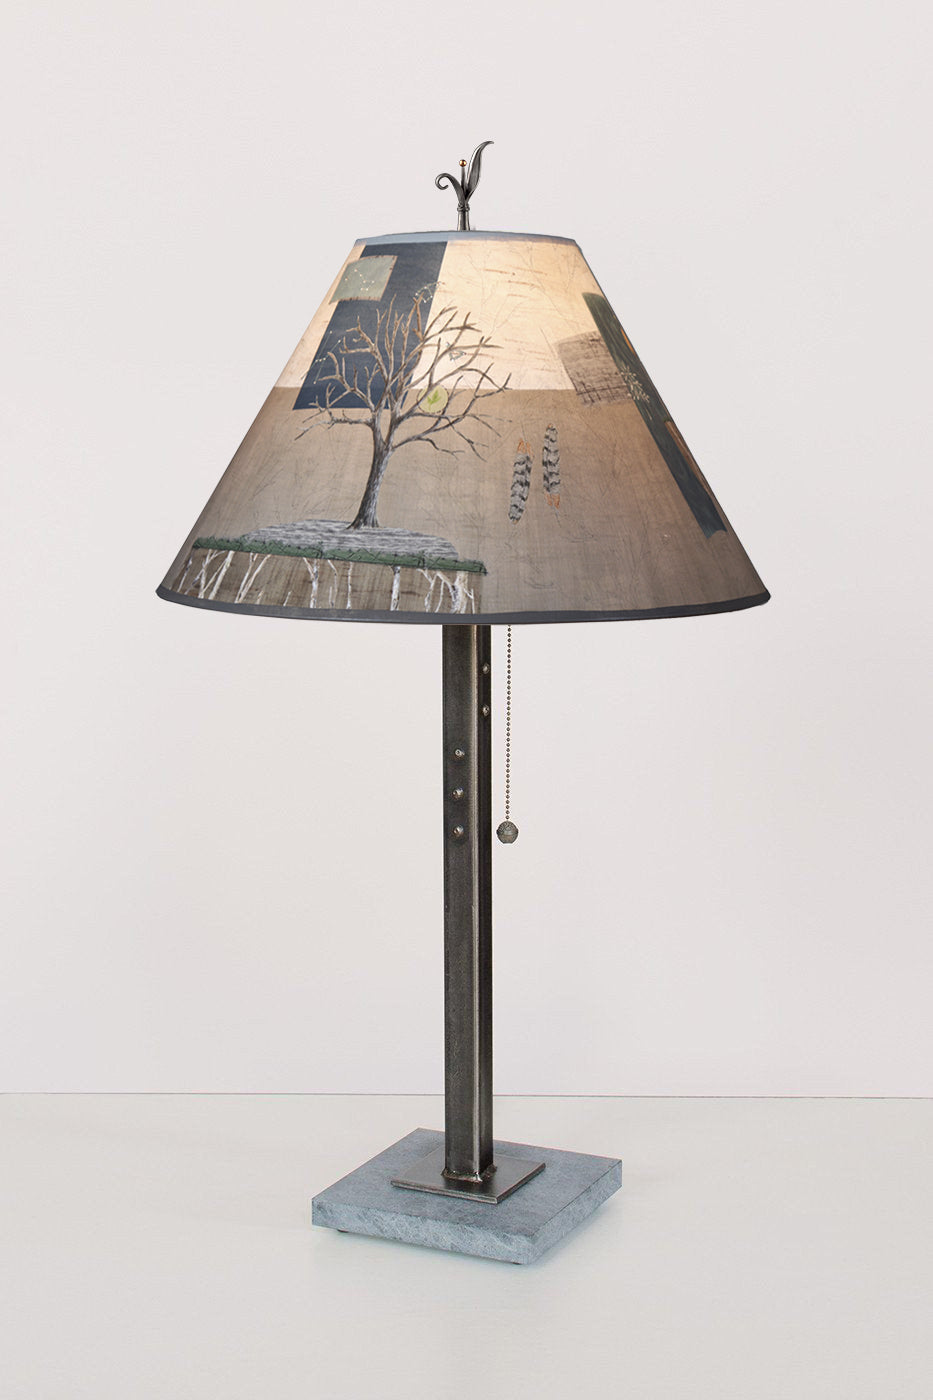 Steel Table Lamp with Medium Conical Shade in Wander in Drift